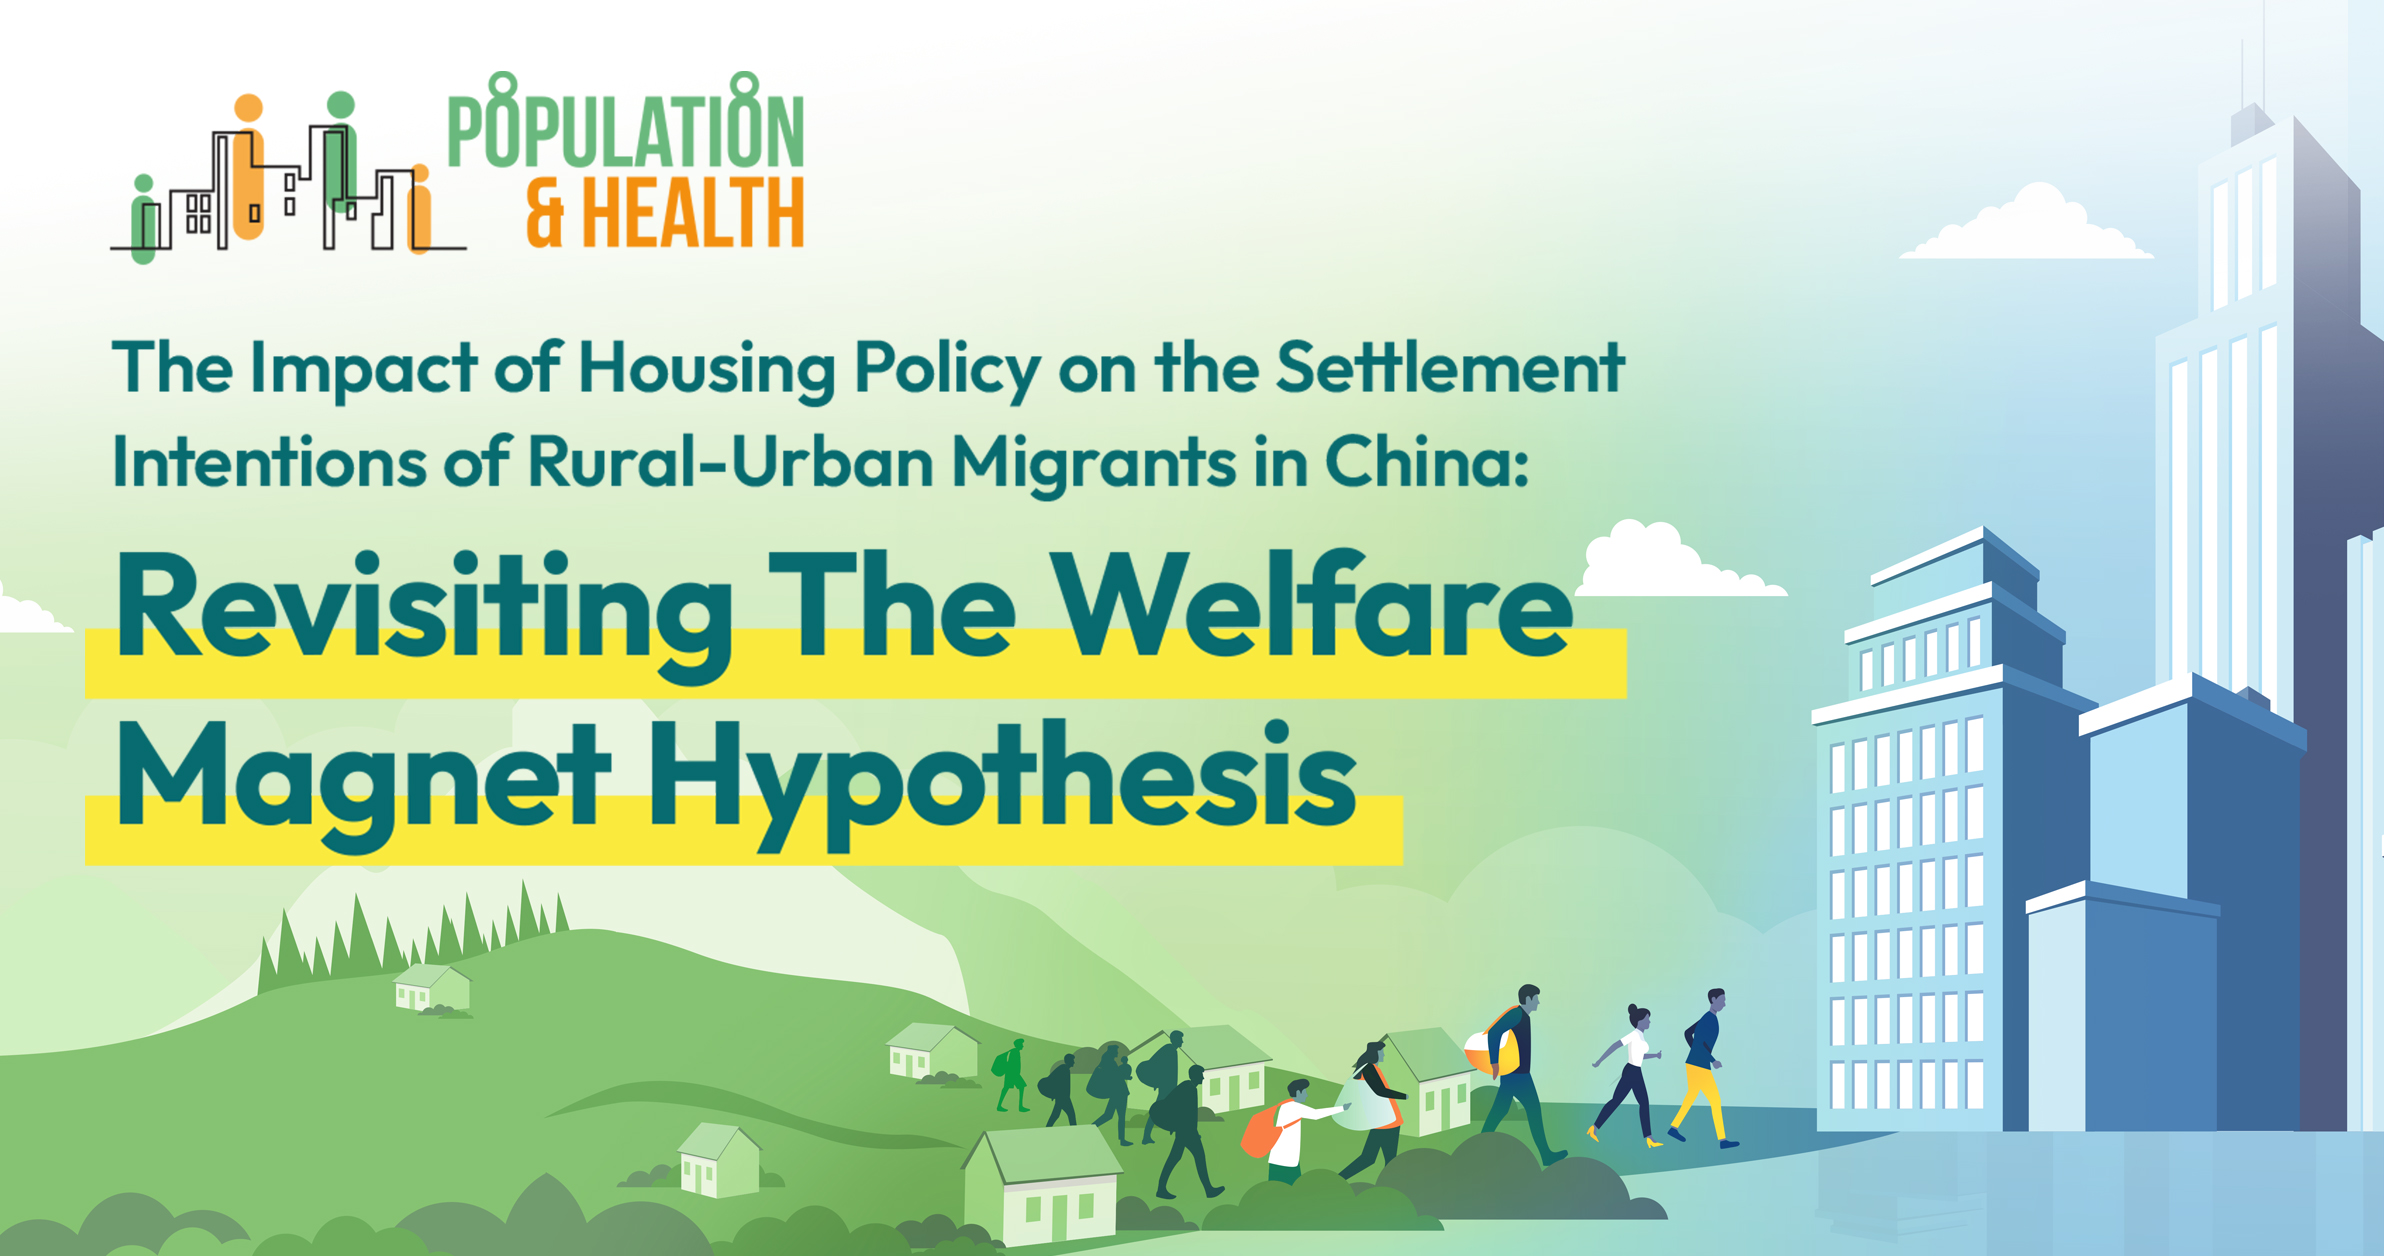 The Impact of Housing Policy on The Settlement Intentions of Rural-Urban Migrants in China: Revisiting The Welfare Magnet Hypothesis